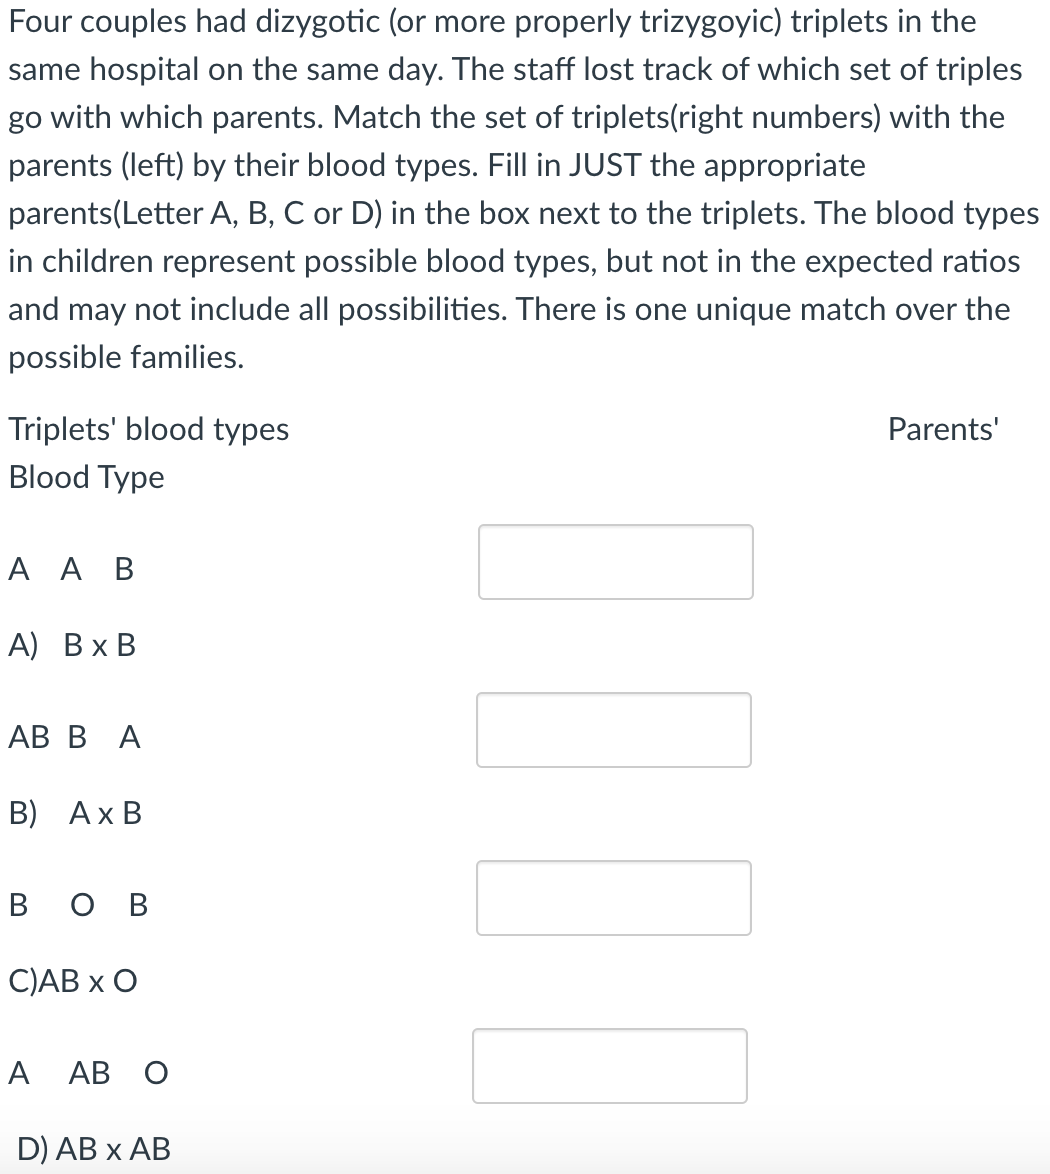 Four couples had dizygotic (or more properly trizygoyic) triplets in the
same hospital on the same day. The staff lost track of which set of triples
go with which parents. Match the set of triplets(right numbers) with the
parents (left) by their blood types. Fill in JUST the appropriate
parents(Letter A, B, C or D) in the box next to the triplets. The blood types
in children represent possible blood types, but not in the expected ratios
and may not include all possibilities. There is one unique match over the
possible families.
Triplets' blood types
Blood Type
A AB
A) B x B
AB BA
B) Ax B
вов
C)AB X O
A AB O
D) AB X AB
0101
Parents'